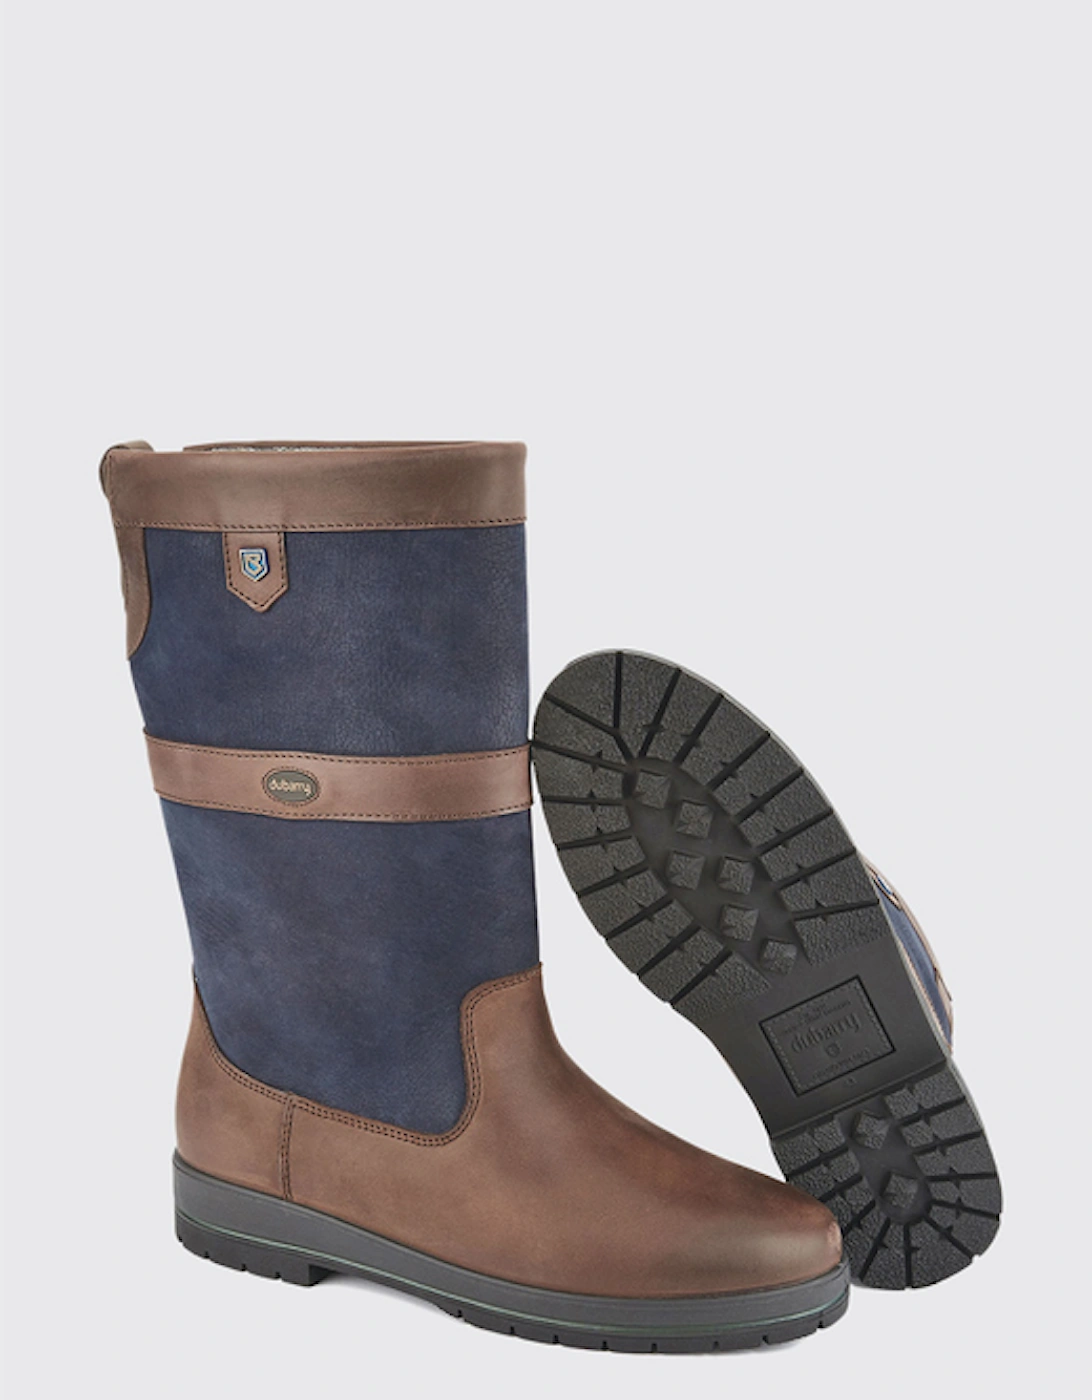 Kildare ExtraFit Country Boot Navy/Brown